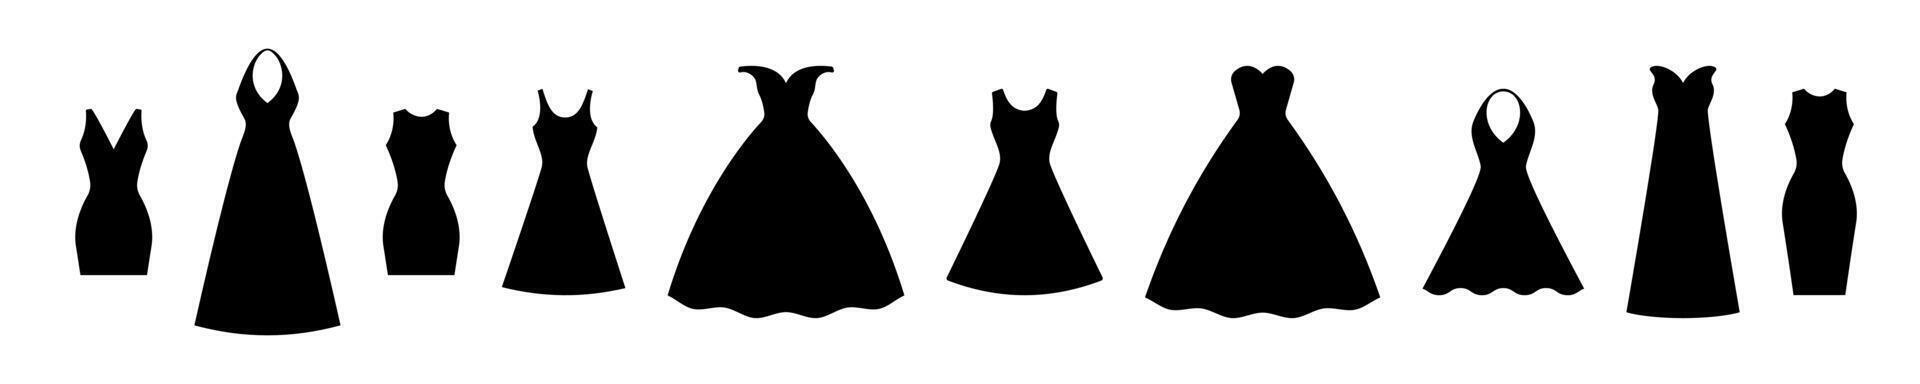 Ballroom and wedding dresses silhouette. Elegant model outfits for beautiful presentations and parties with romantic vector glamor